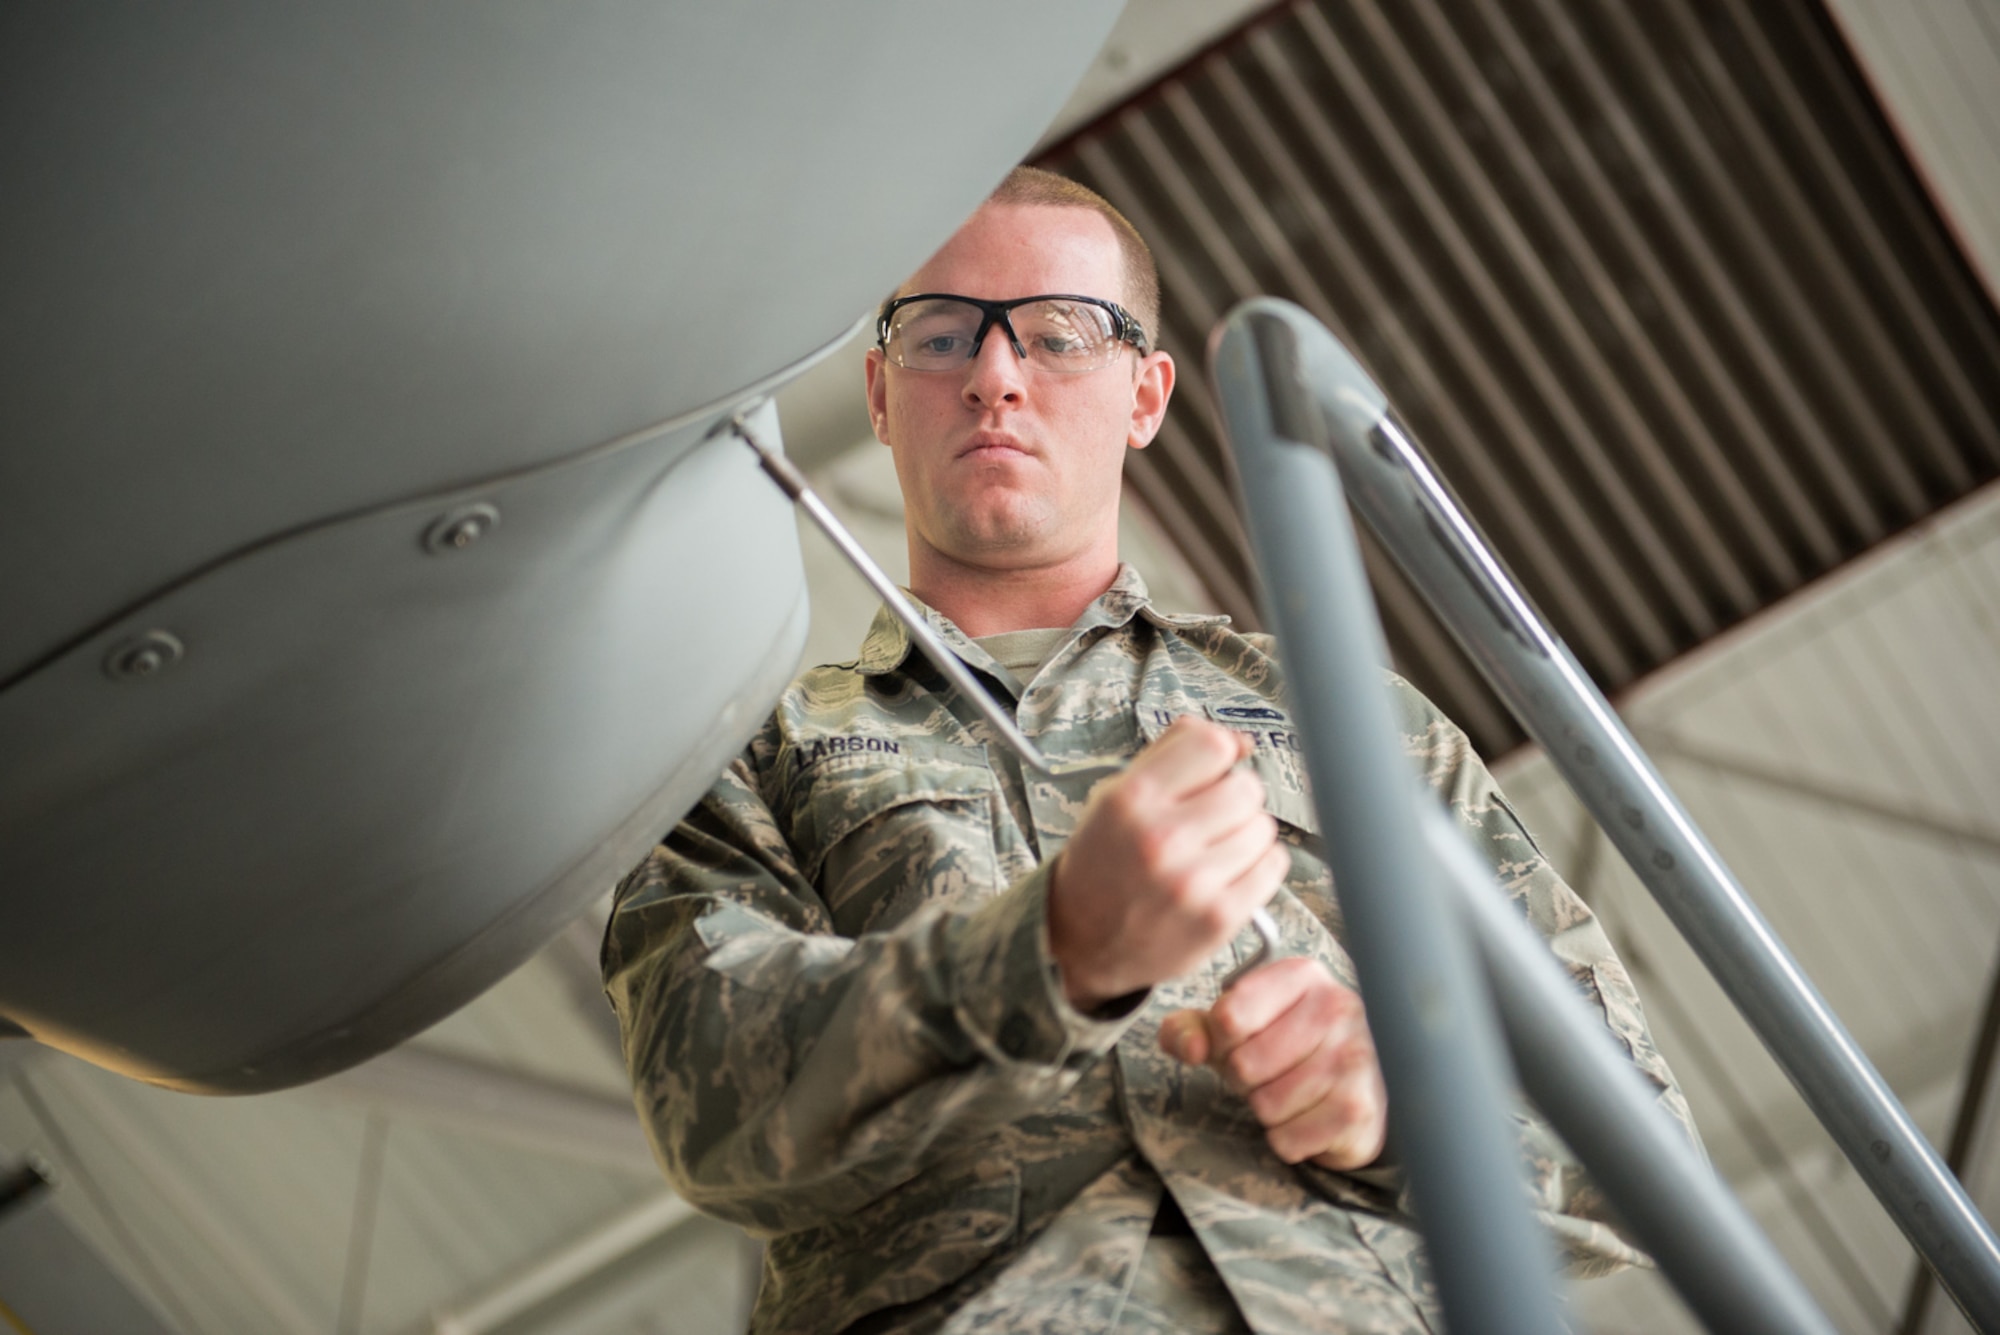 Staff Sgt. Jim Larson, 934th Maintenance Squadron, performs routine pre-deployment maintenance on a C-130 October 16. (U.S. Air Force photo by Tech. Sgt. Trevor Saylor)